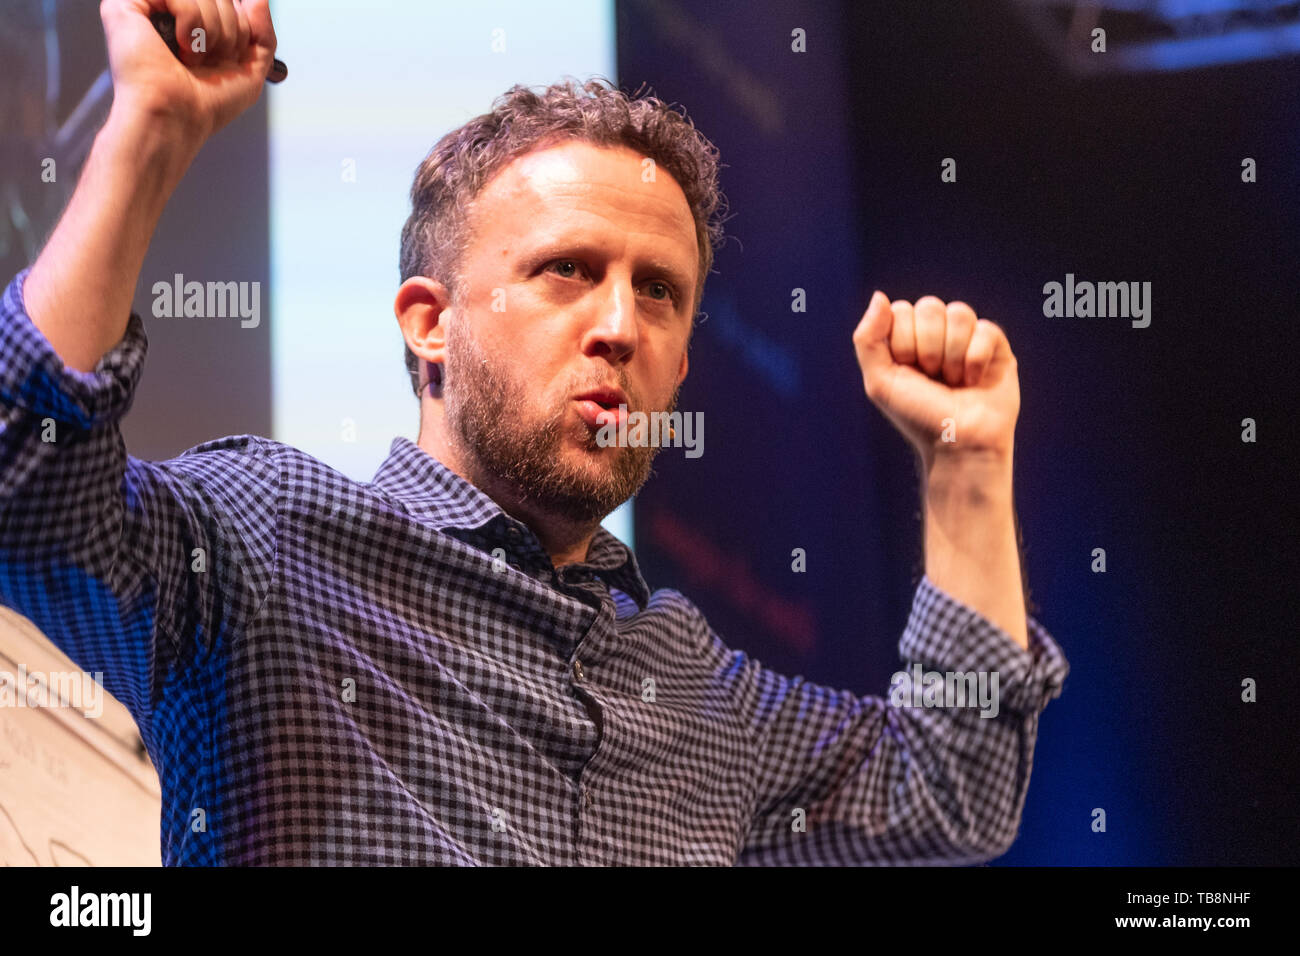 The Hay Festival, Hay on Wye, Wales UK , Friday 31st May 2019.  Blue Peter award-winning writer Kieran Larwood, author of the  ‘Five Realms’ series   of fantasy books  for teenage readers, at  the 2019 Hay Festival   The festival, now in its 32nd year, held annually in the small town of Hay on Wye on the Wales - England border,  attracts the finest writers, politicians and intellectuals from  across the globe for 10 days of talks and discussions, celebrating the best of the written word and critical debate  Photo © Keith Morris / Alamy Live News Stock Photo